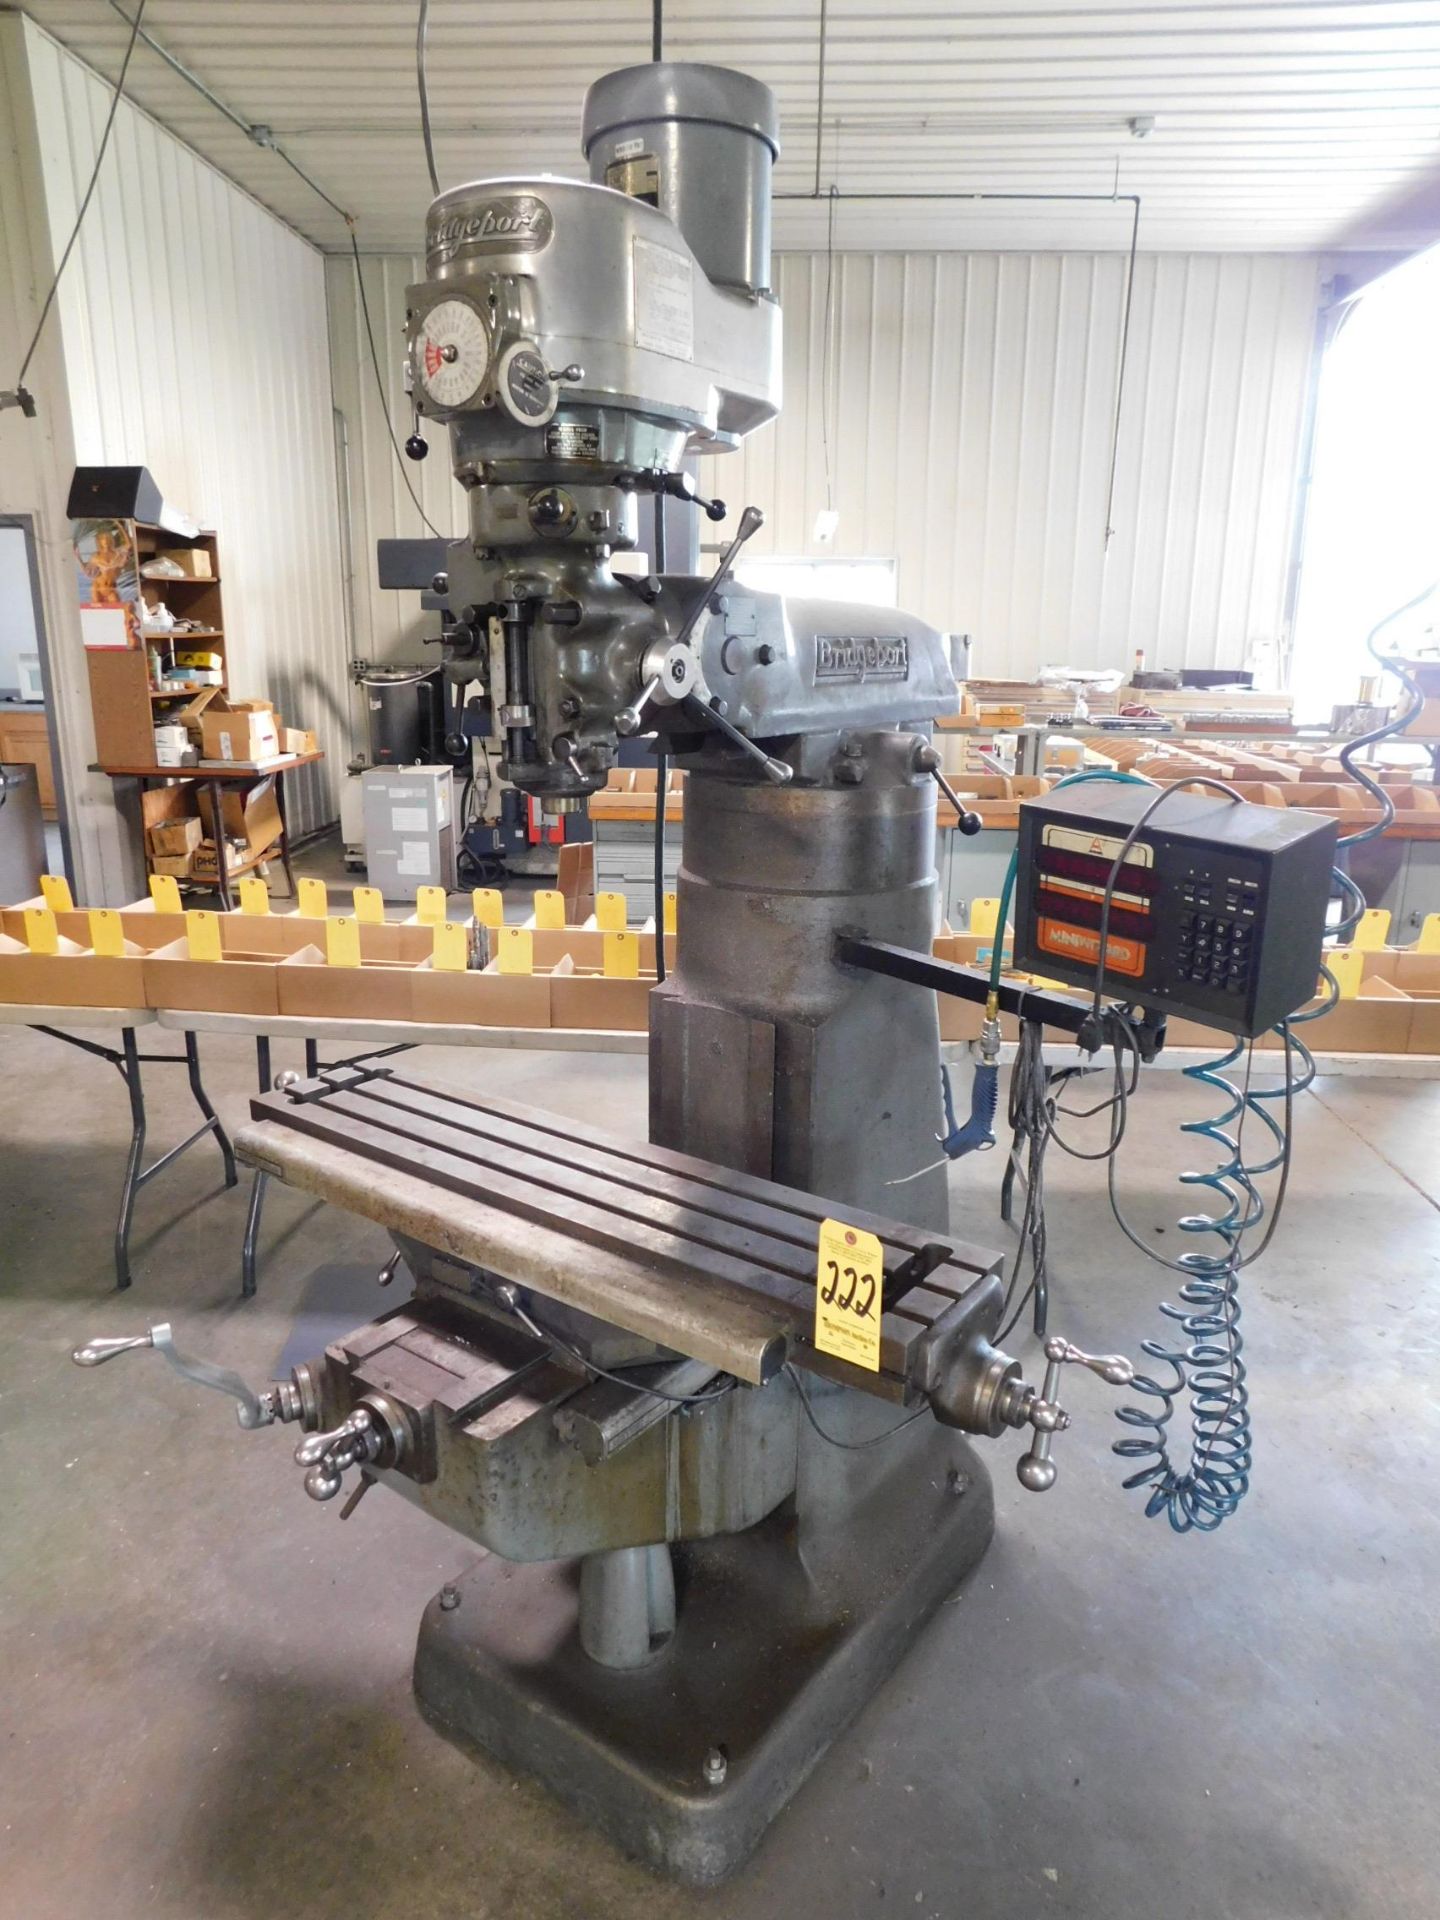 Bridgeport 1 1/2 H.P. Variable Speed Vertical Mill sn#12BR143491,9"X42" Table, 4"Riser Block, Amilam